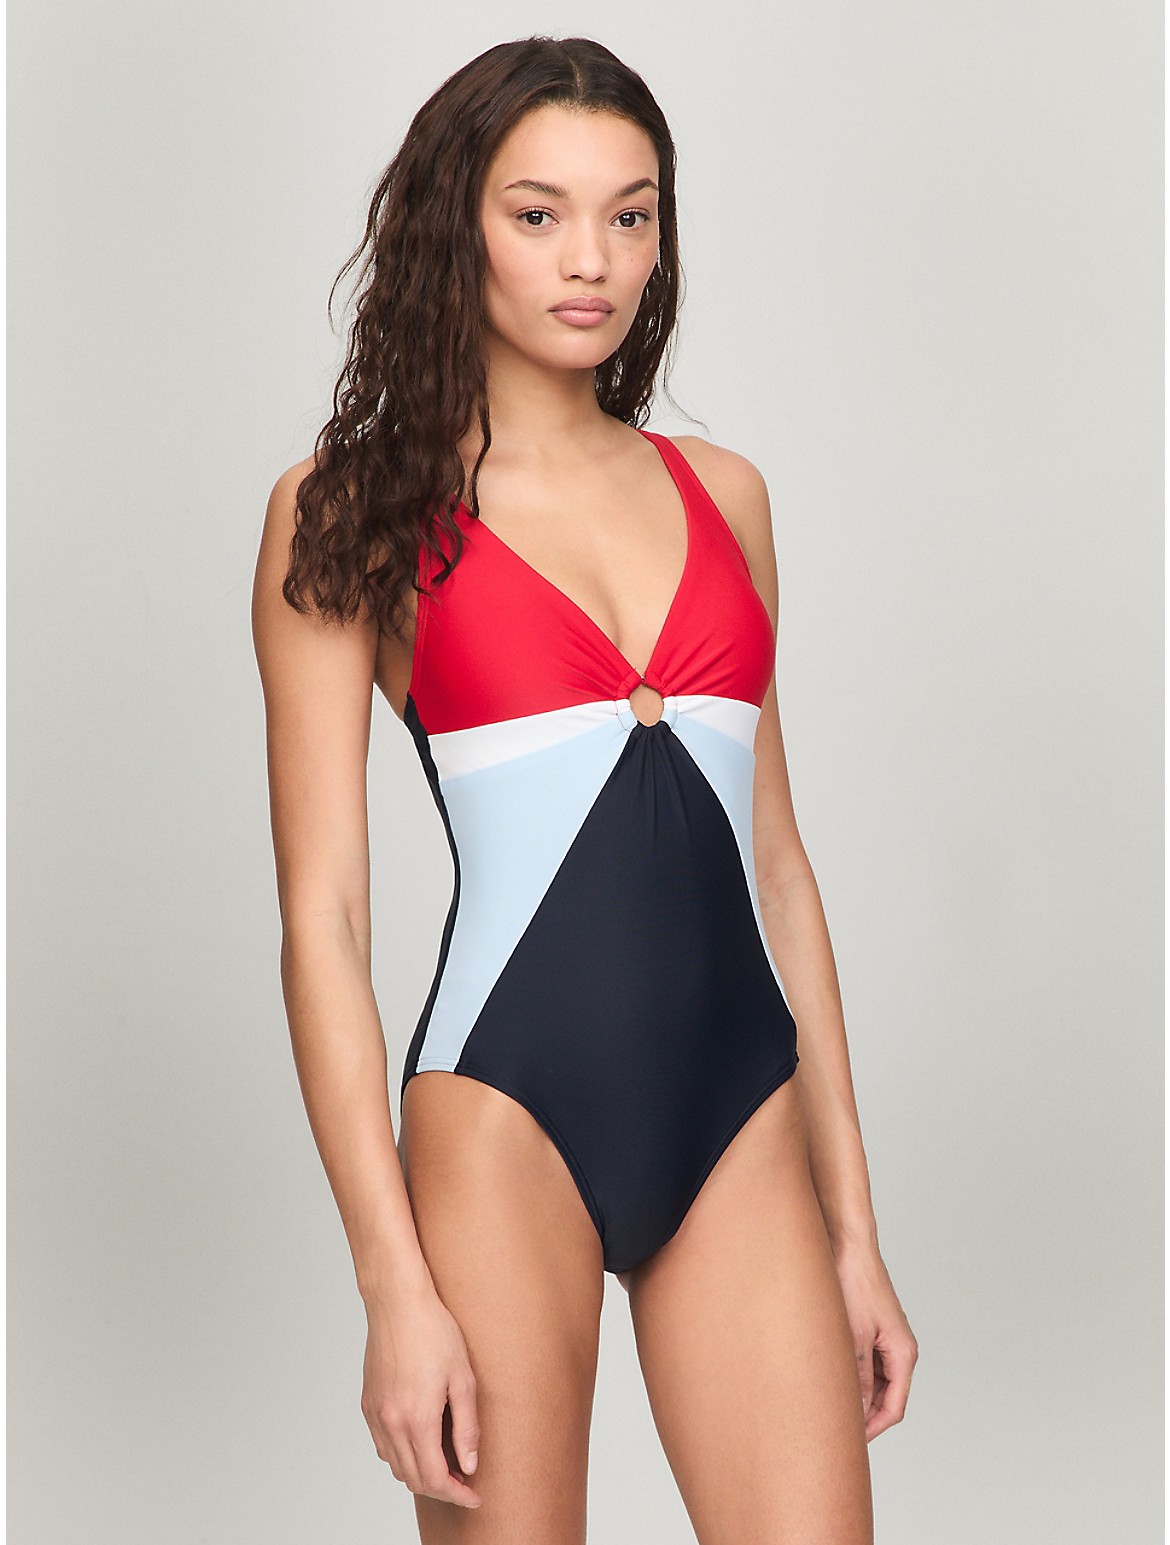 Tommy Hilfiger Women's Colorblock Center Ring Swimsuit